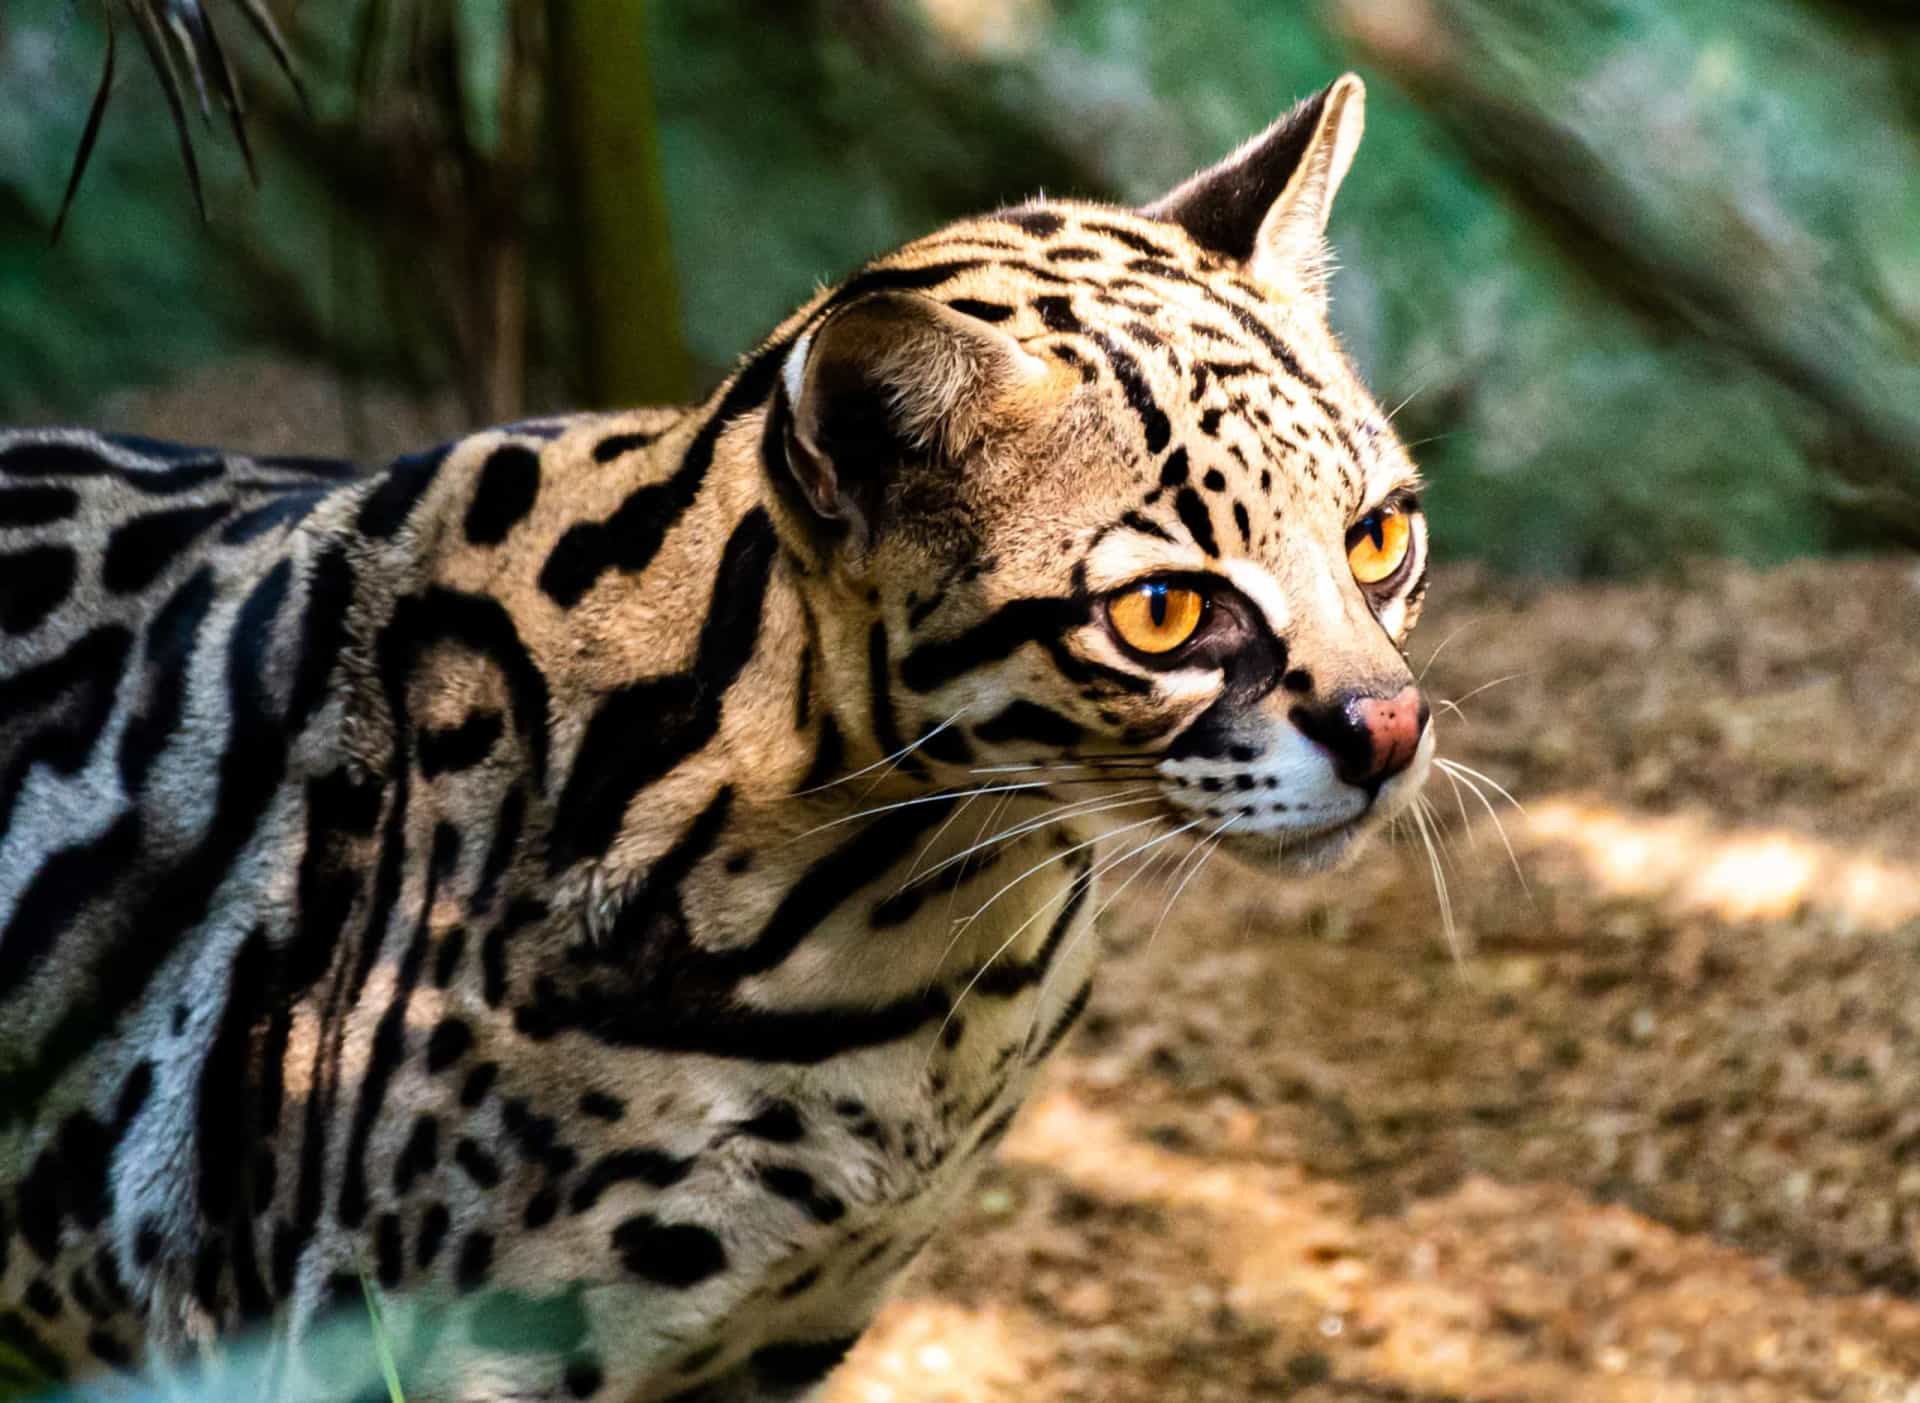 <p>The animals at Beardsley, the only zoo in Connecticut, include the beautiful Brazilian ocelot, found in the Rain Forest Building. The zoo also features a vintage carousel, a nod towards P.T. Barnum, whose world-famous circus was based in Bridgeport.</p><p><a href="https://www.msn.com/en-us/community/channel/vid-7xx8mnucu55yw63we9va2gwr7uihbxwc68fxqp25x6tg4ftibpra?cvid=94631541bc0f4f89bfd59158d696ad7e">Follow us and access great exclusive content everyday</a></p>